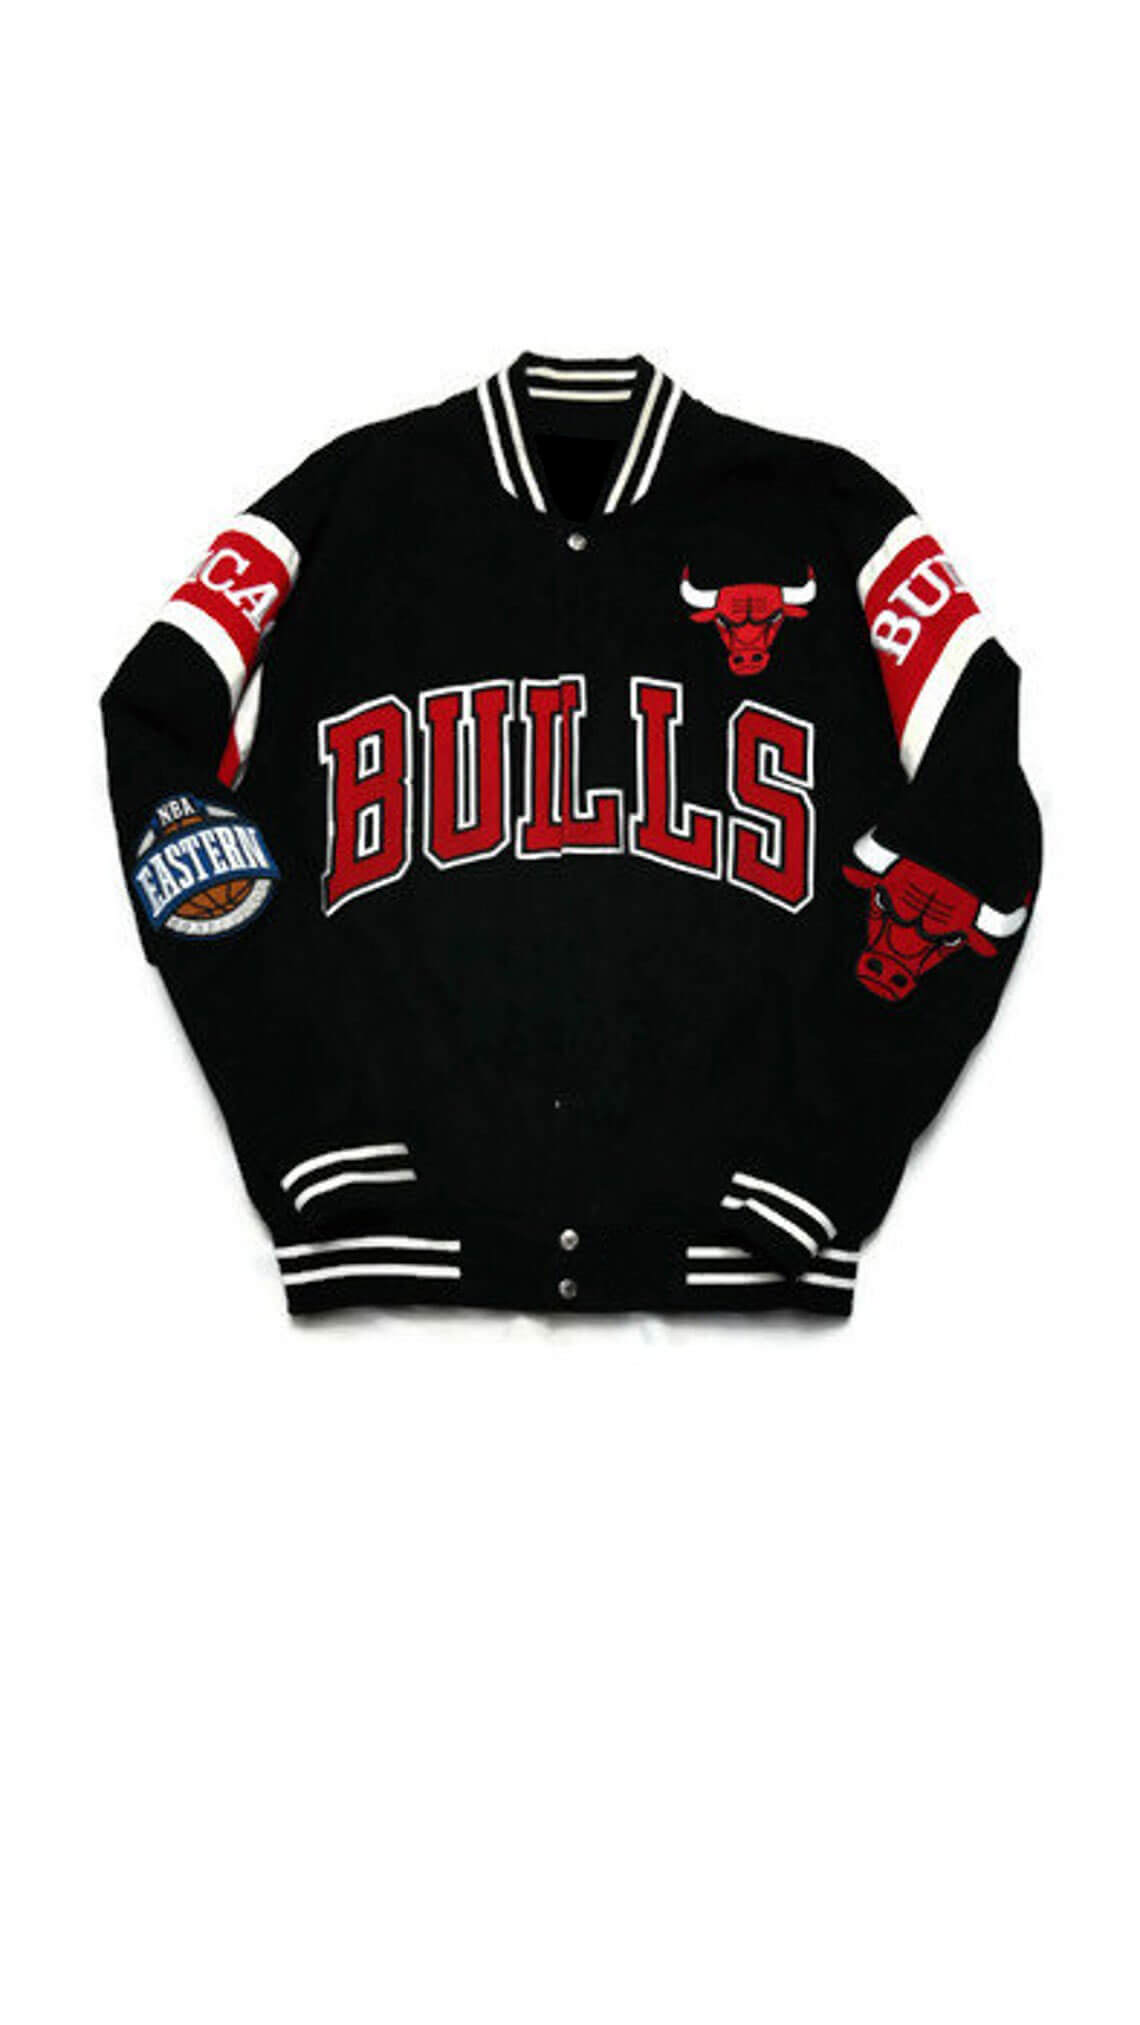 Chicago Bulls Clothing - Buy Chicago Bulls Clothing online in India